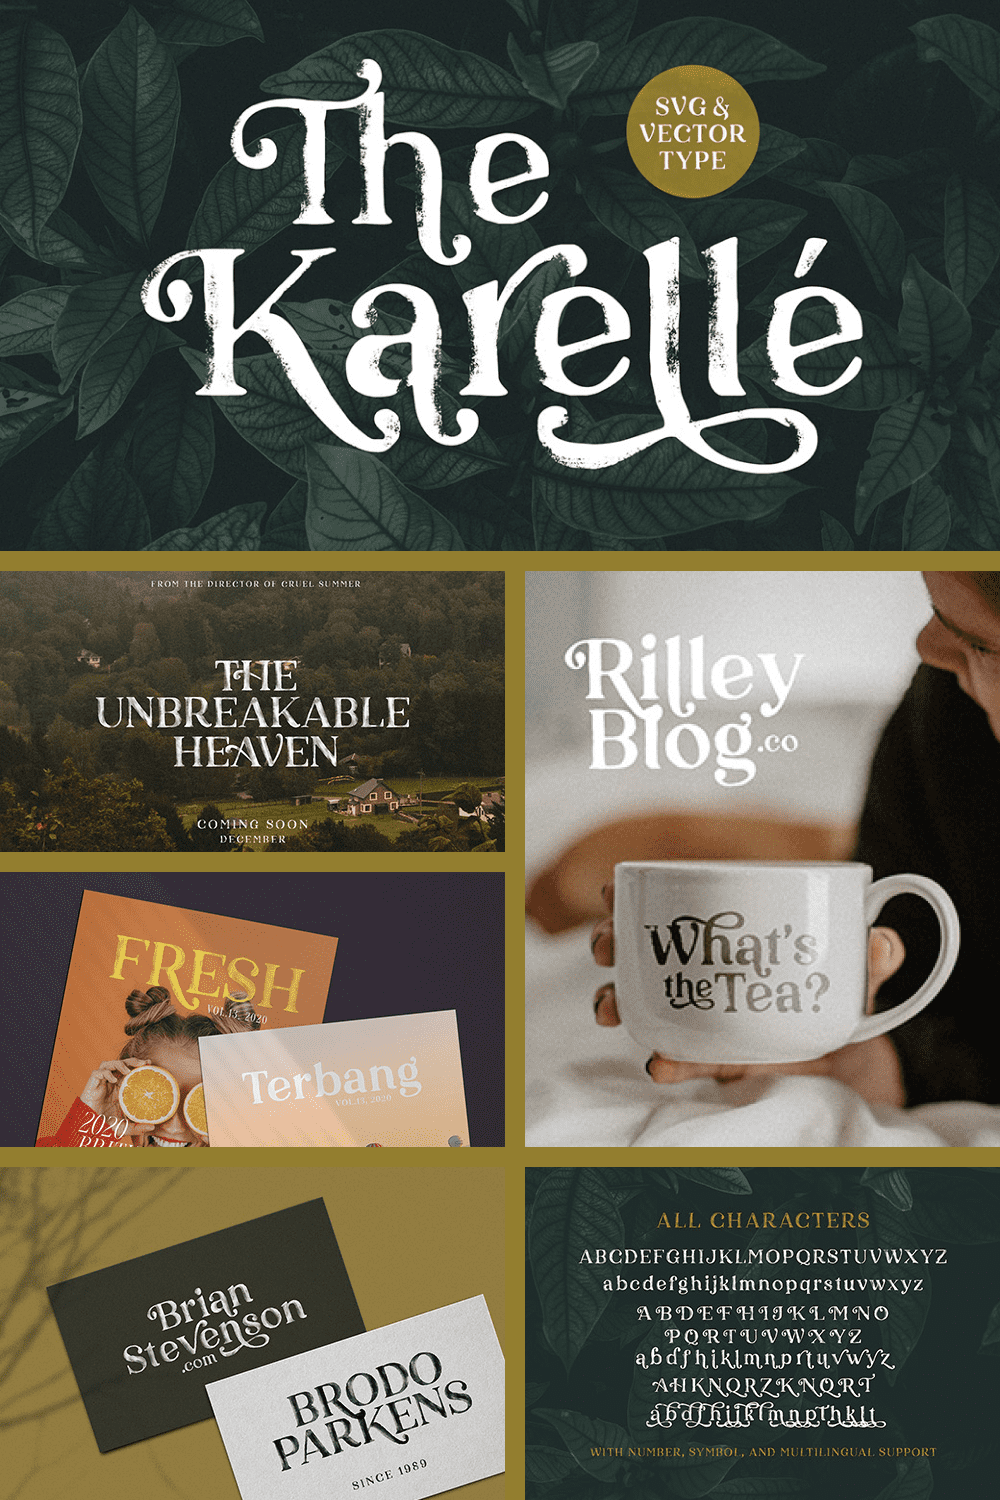 Karelle is literally packed with natural feels, meant to give you chills of playfulness and an aesthetic overdose.